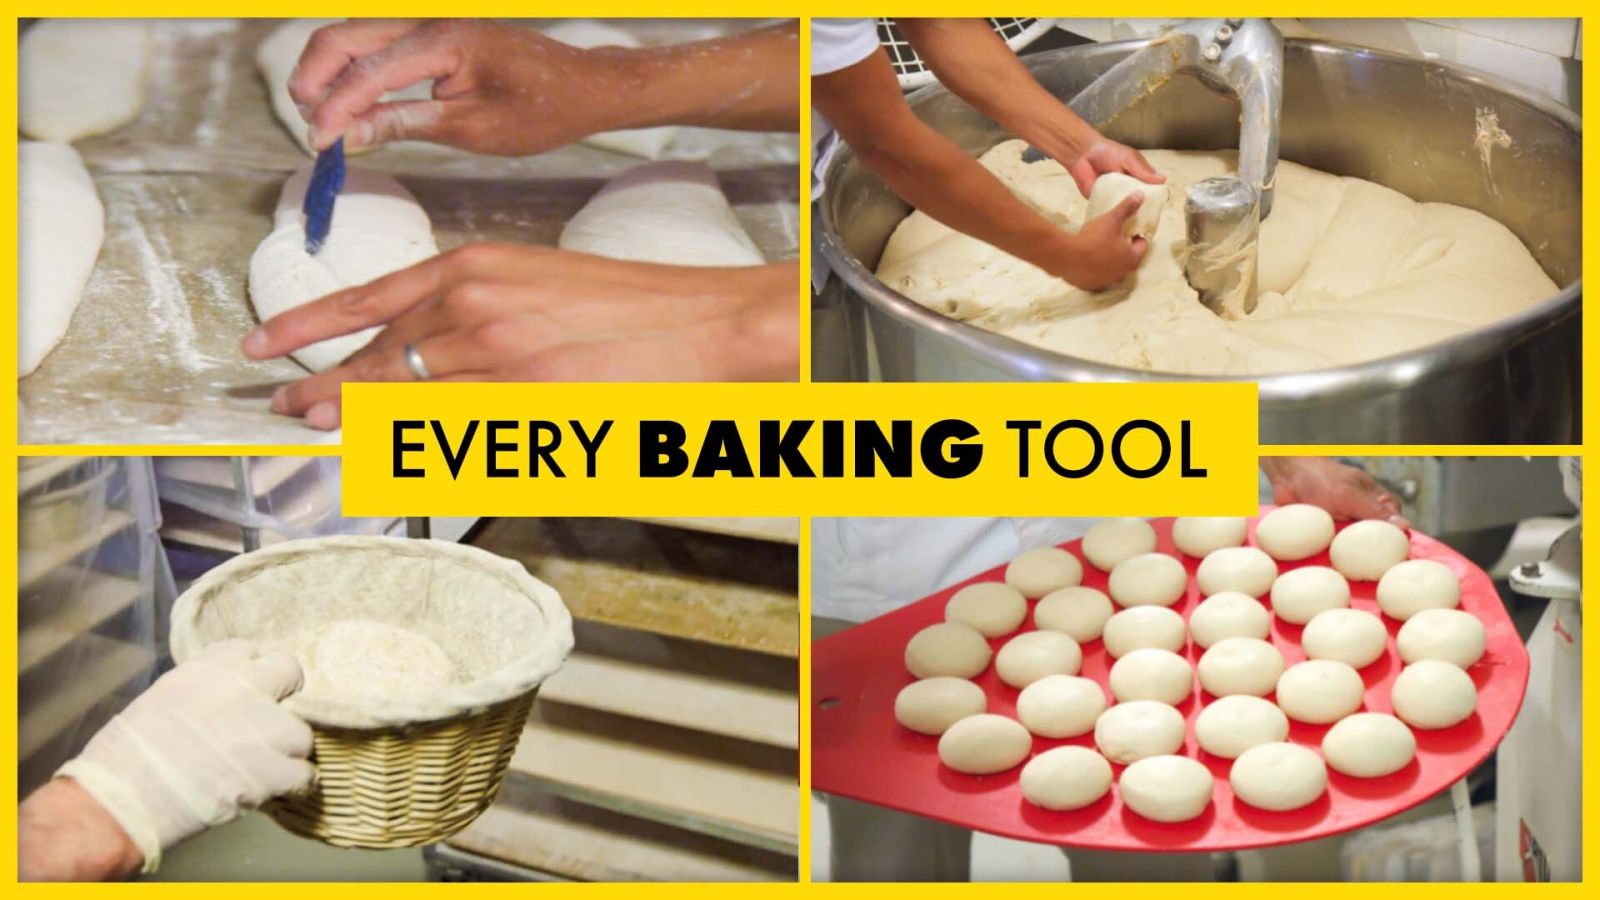 Every Tool An Iconic NYC Bakery Uses To Make Bread & Pastry